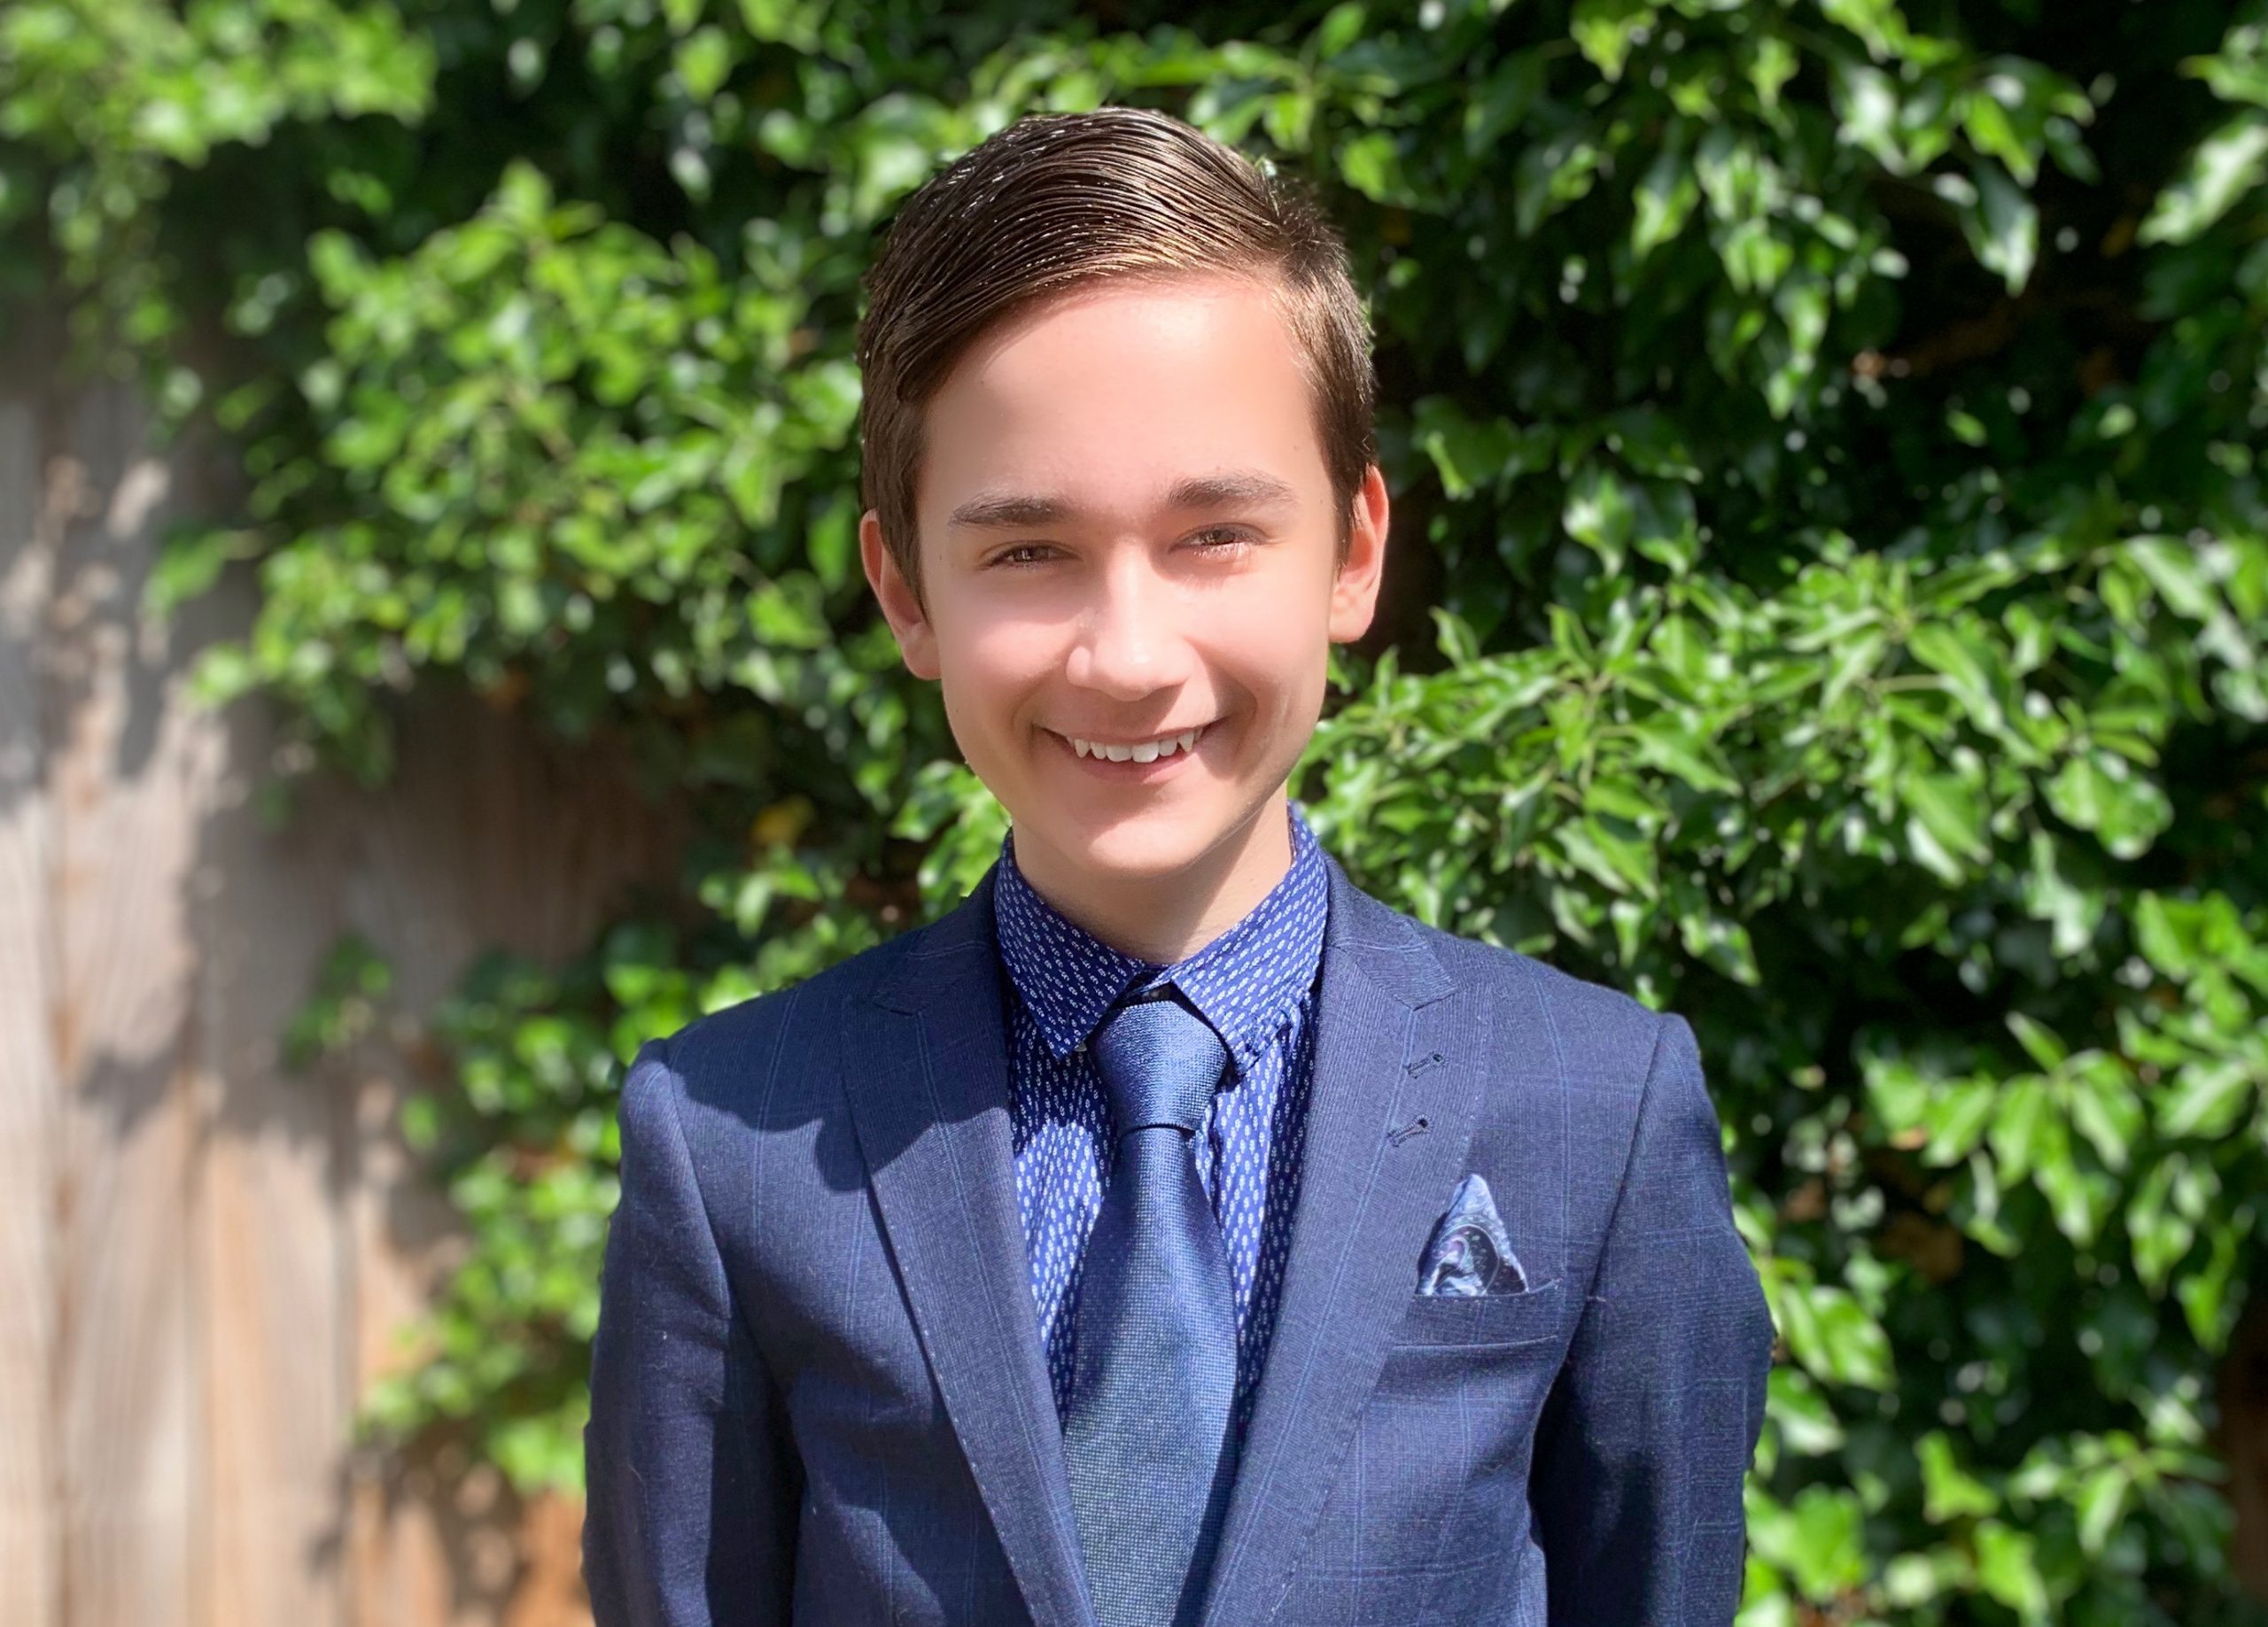 Youth MP announces 12 hour live-stream in aid of charities amidst COVID-19